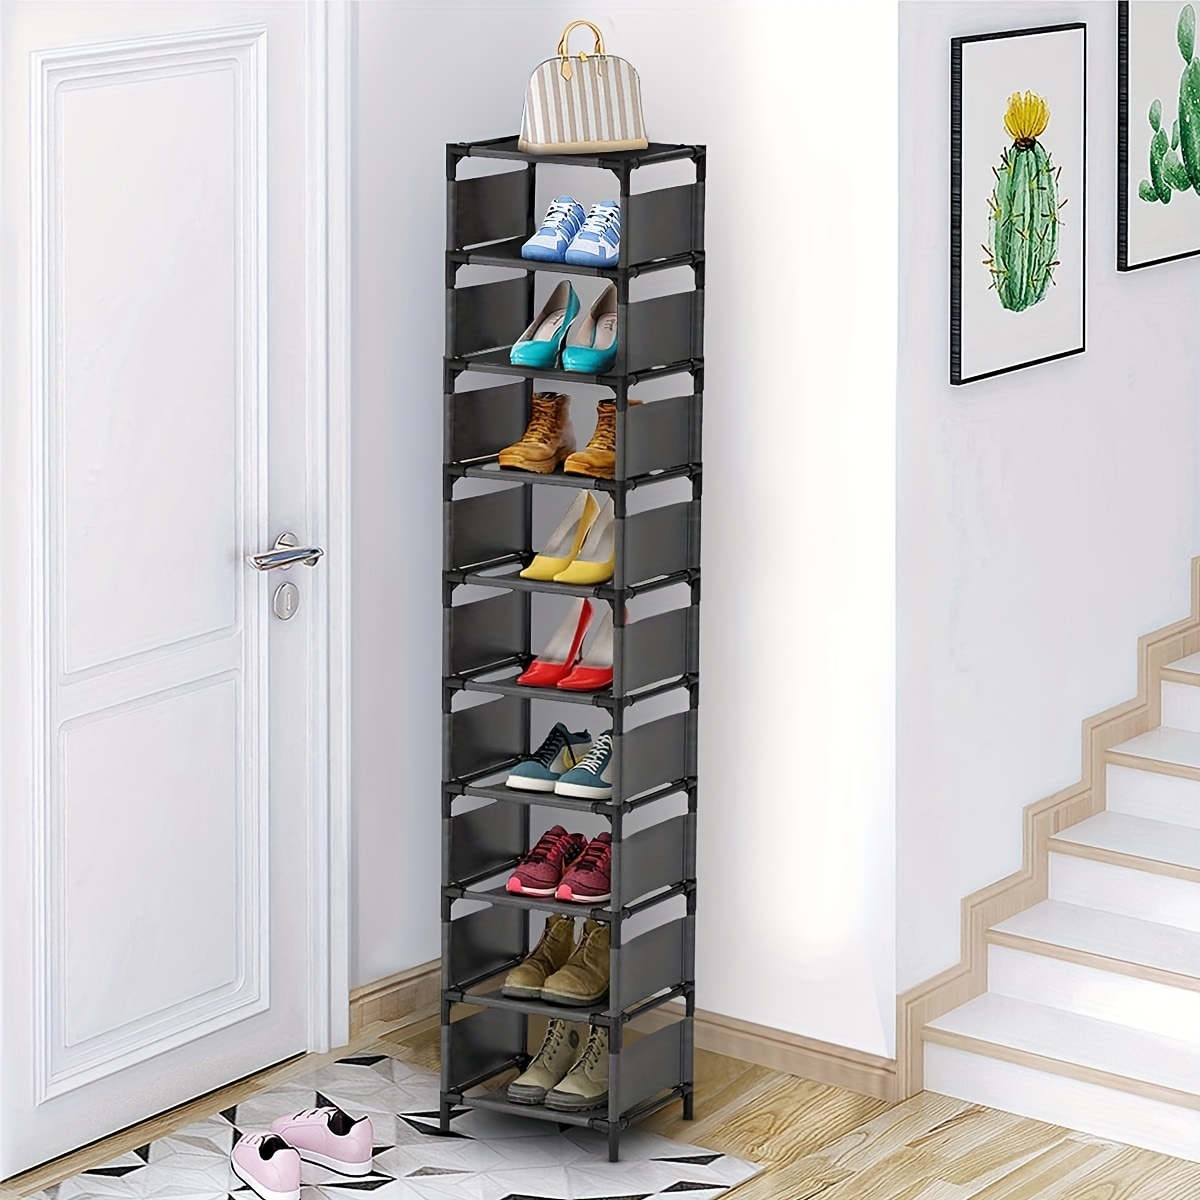 

1pc Space-saving Floor Standing Shoe Rack - 10-layer Organizer For Home, School, Dorm, And Rental Housing - Easy Assembly And Convenient Entryway Storage